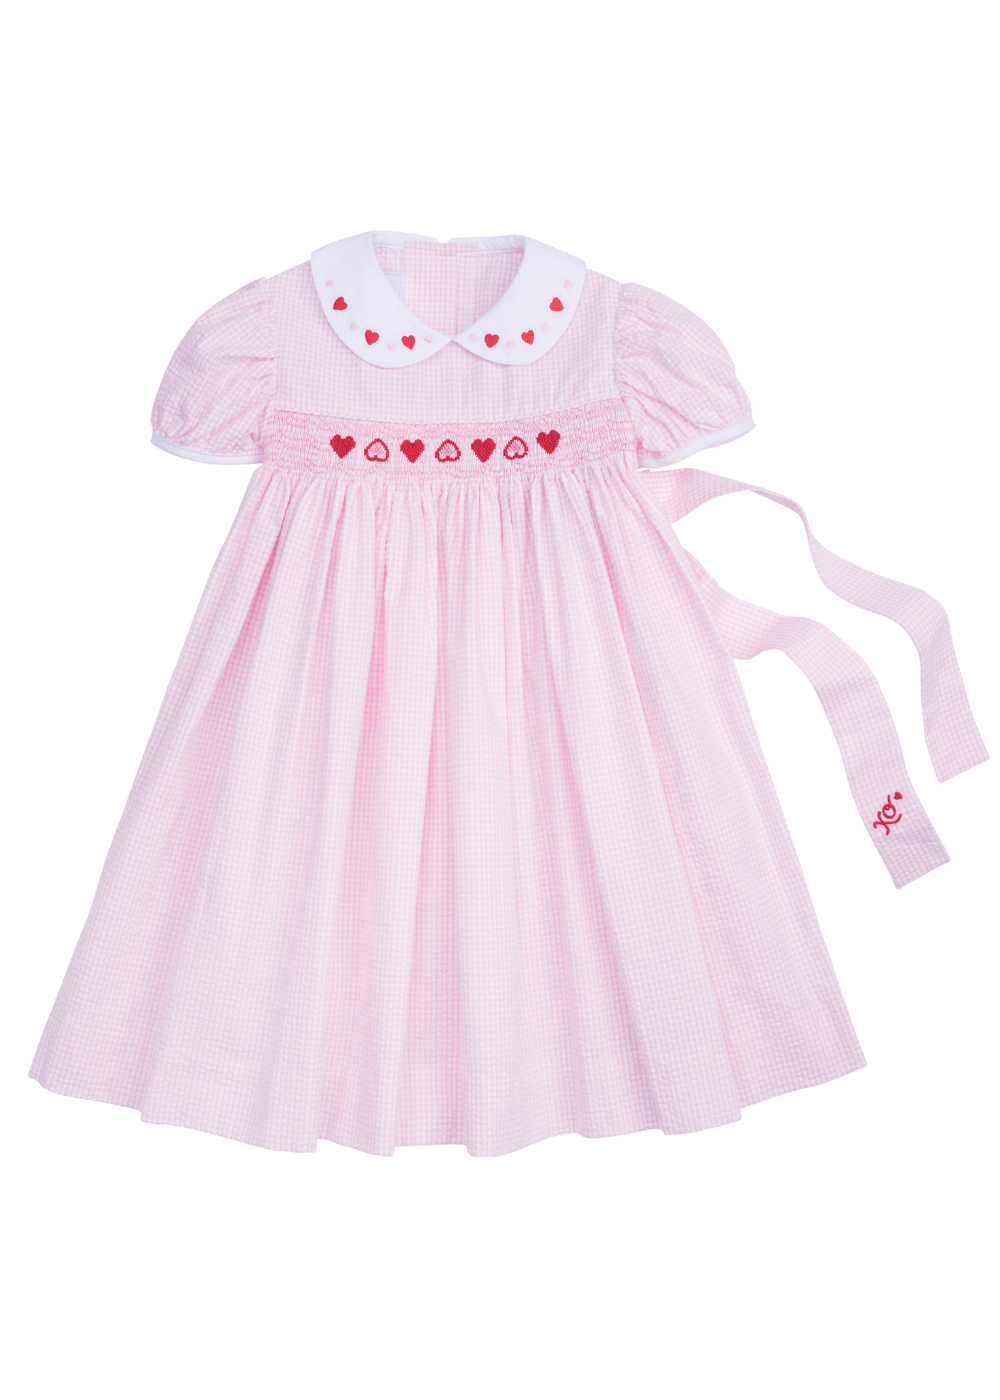 seguridadindustrialcr girl's pink seersucker dress with hearts smocking and embroidery at the collar